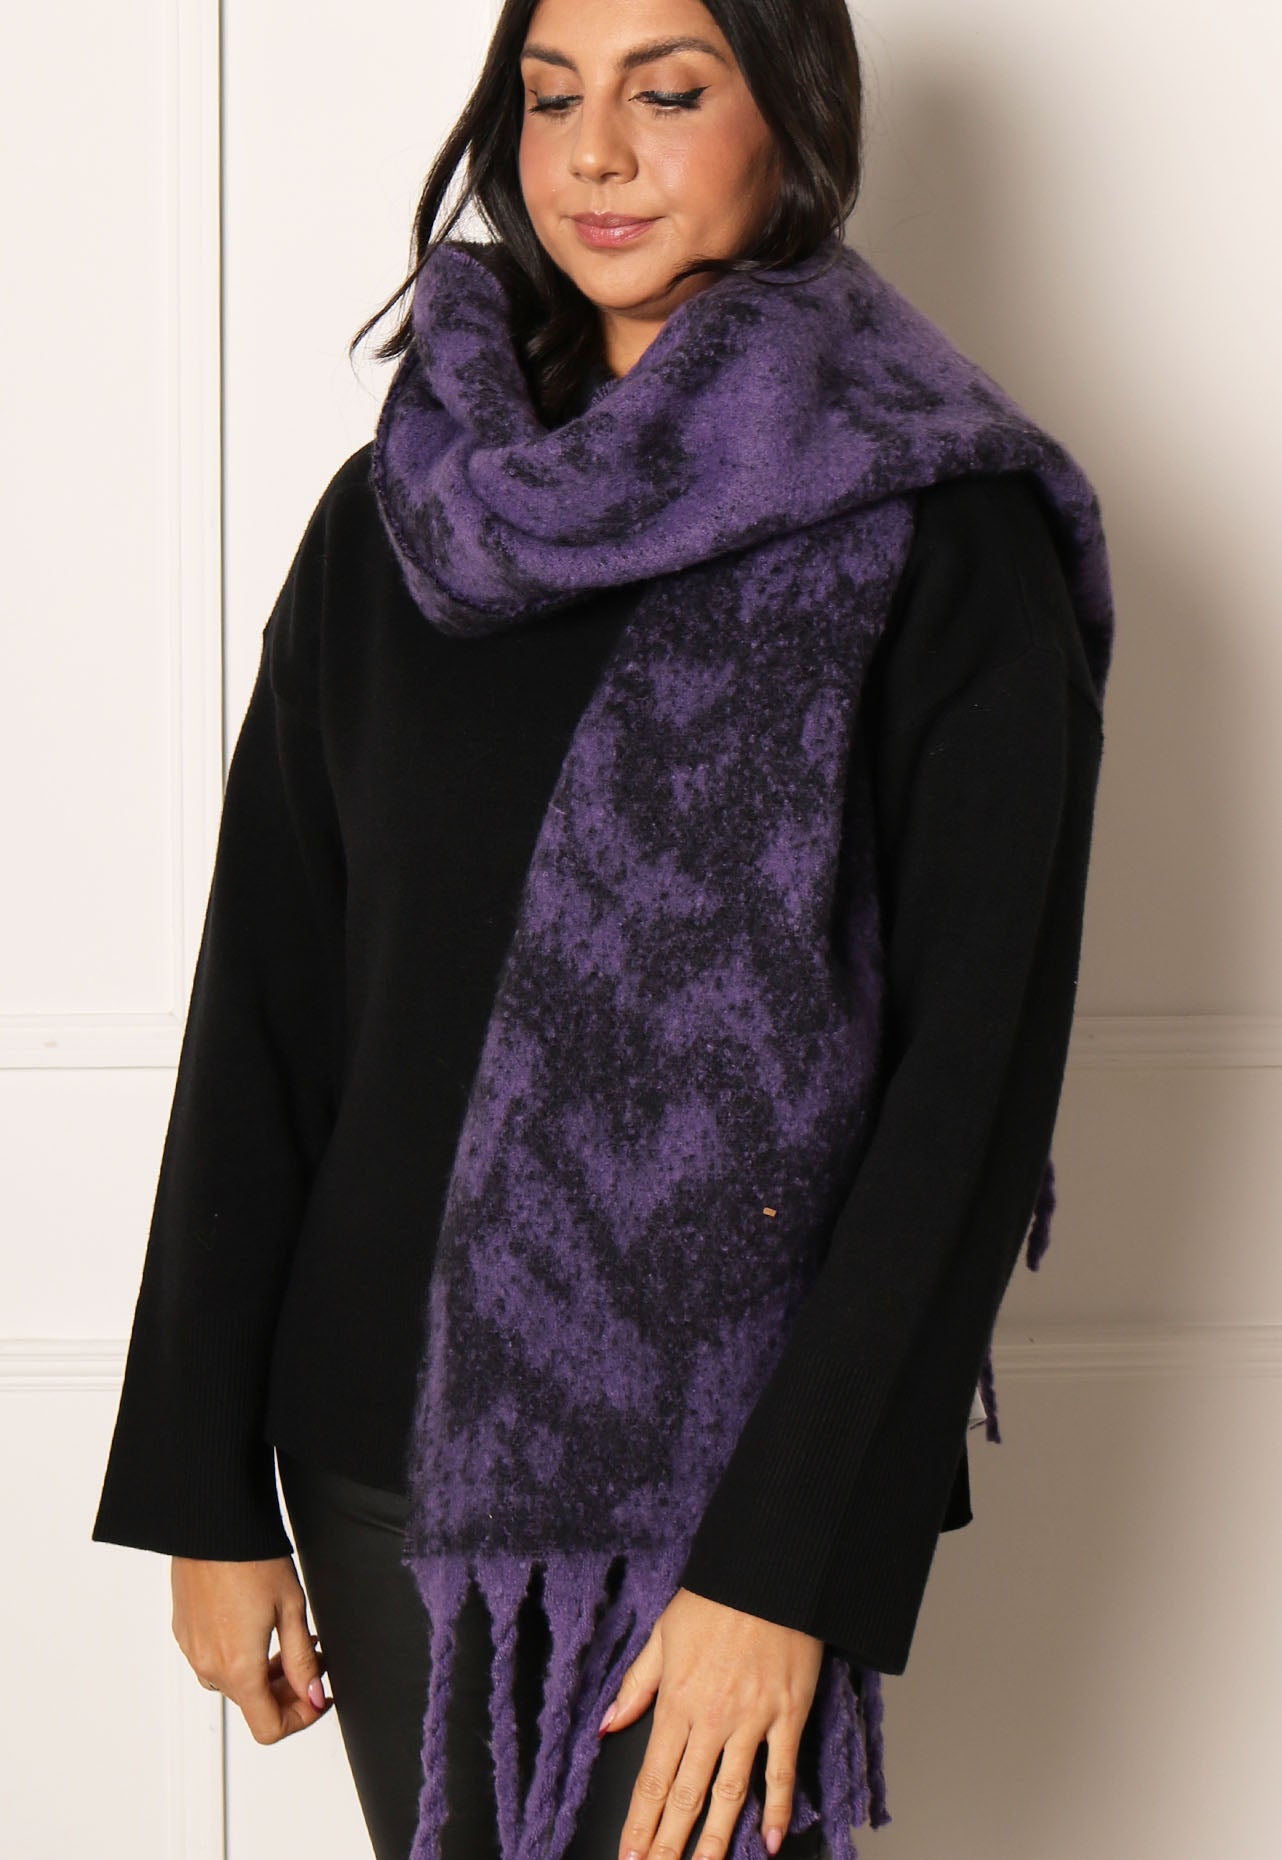 VERO MODA Lillie Oversized Heavyweight Animal Print Scarf with Tassels in Black & Purple - One Nation Clothing